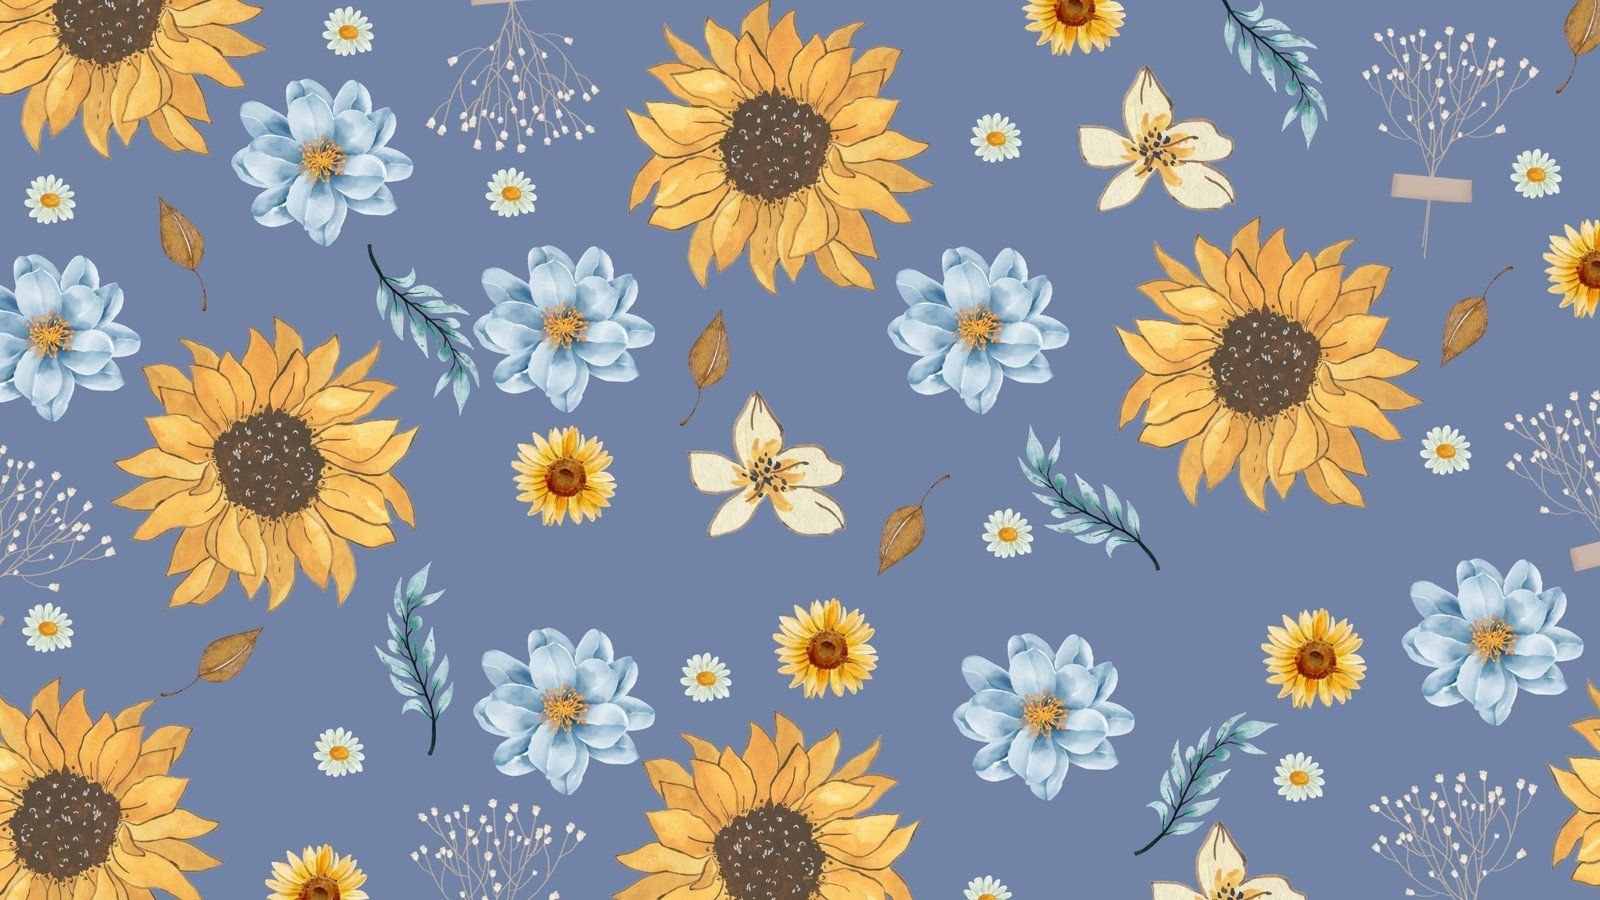 A blue wallpaper with yellow sunflowers and blue flowers - Flower, daisy